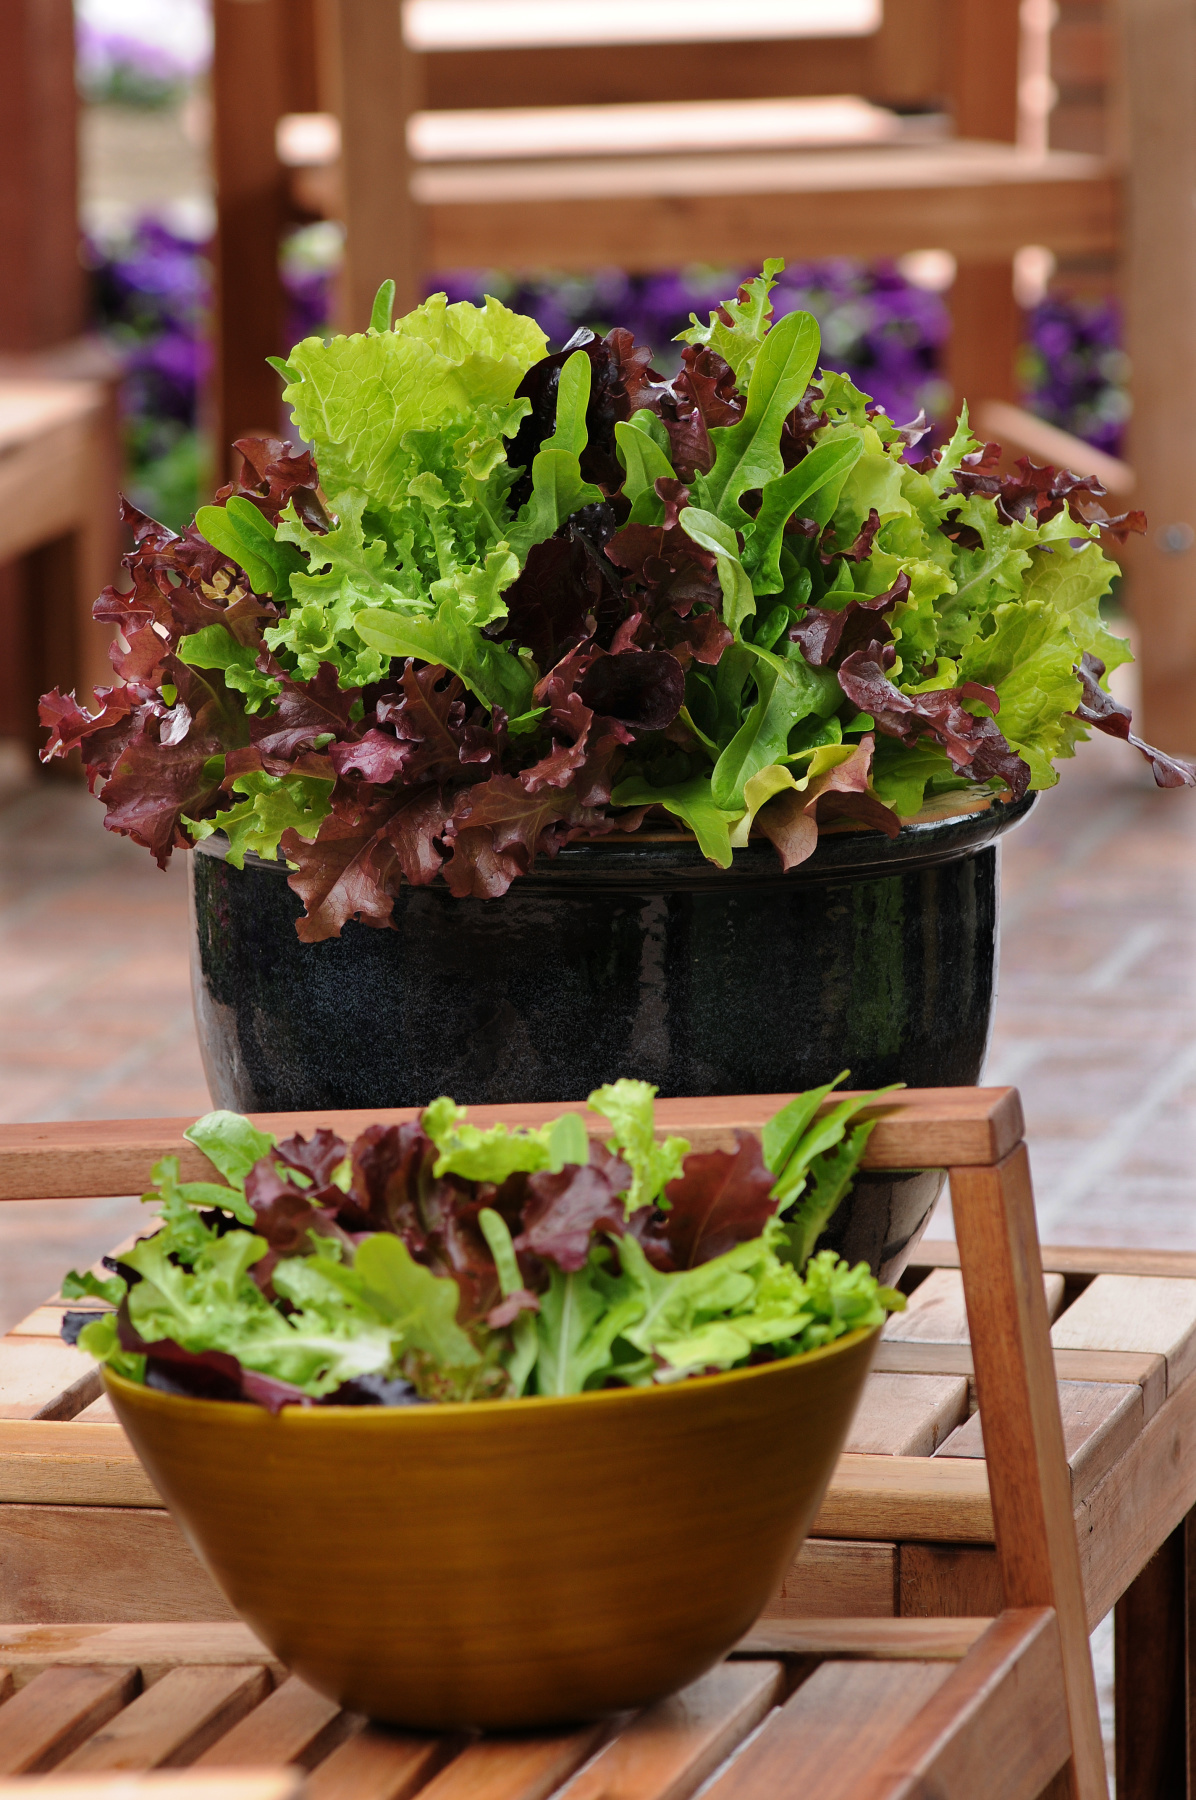 Simply salad is a variety name of greens from PanAmerican Seed.  It can be grown in small to large containers or in the garden.  COURTESY PANAMERICAN SEED